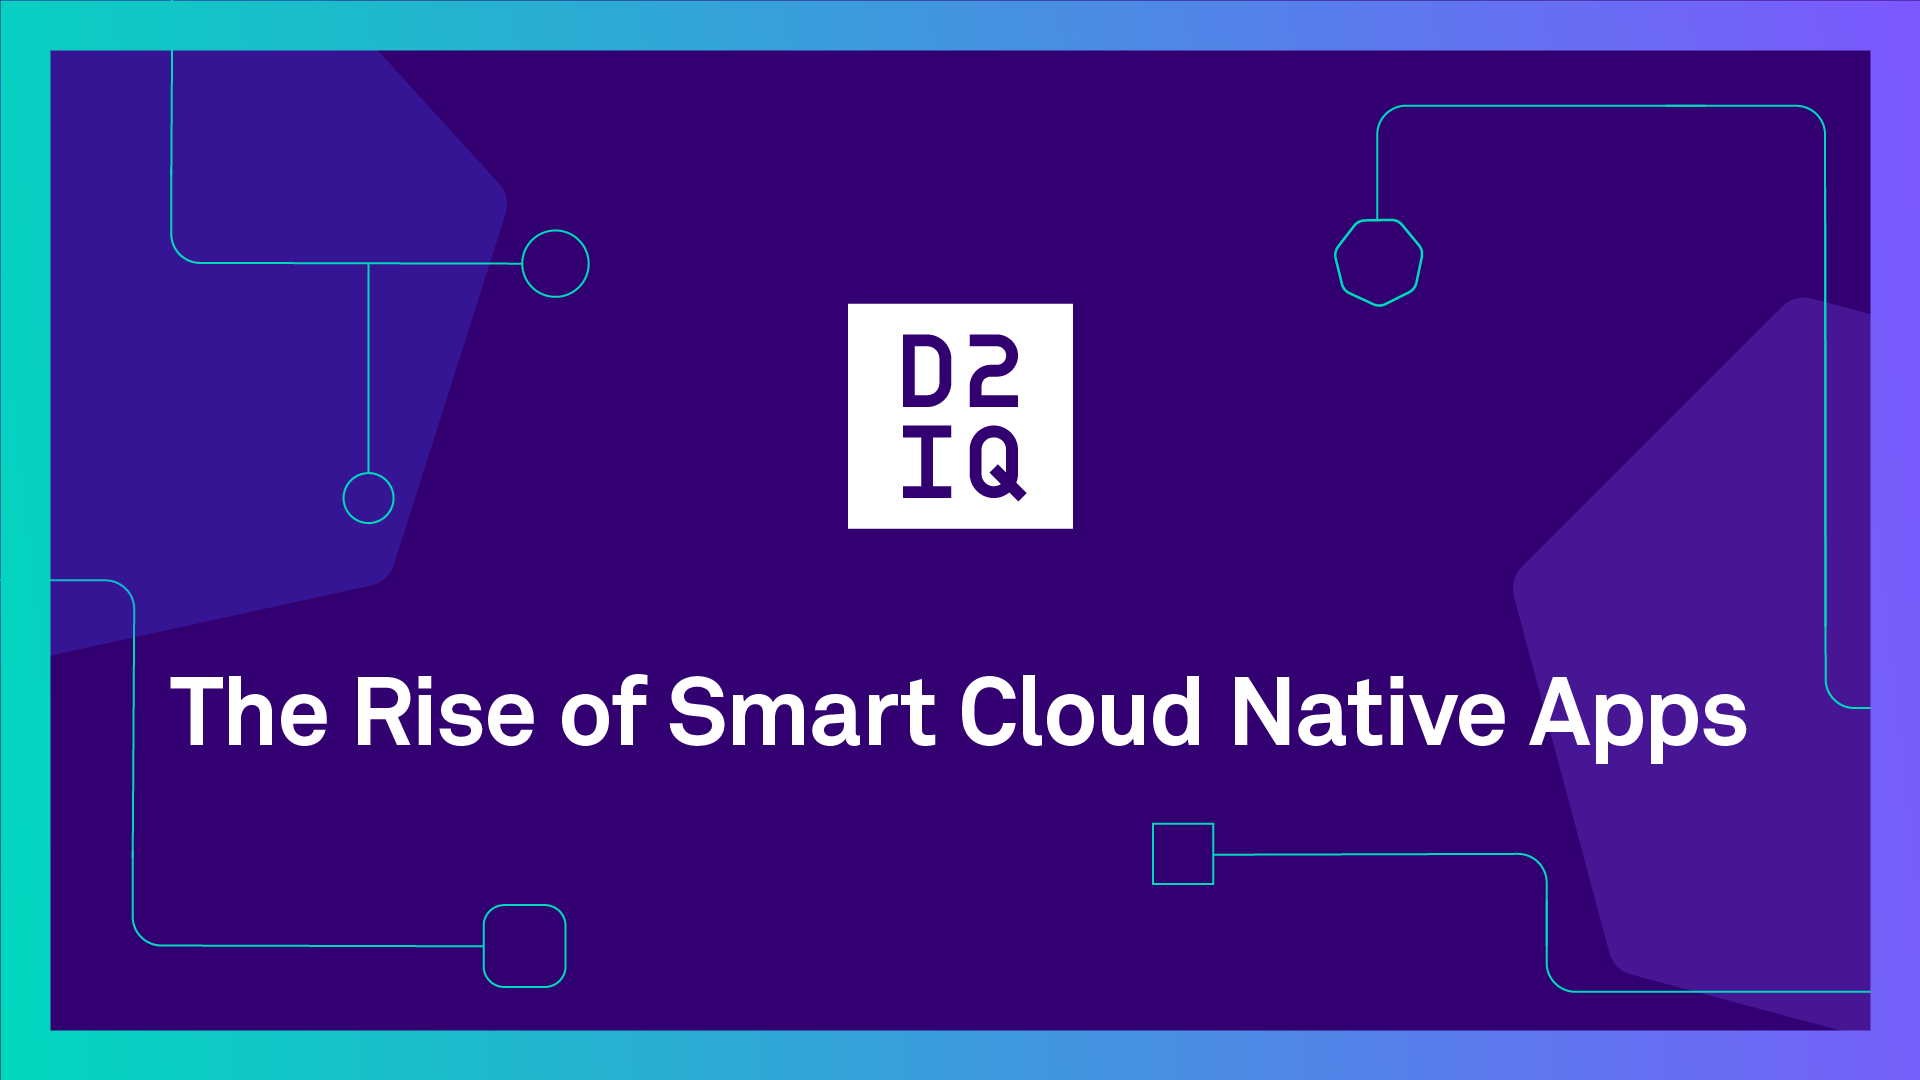 The Rise of Smart Cloud Native Apps